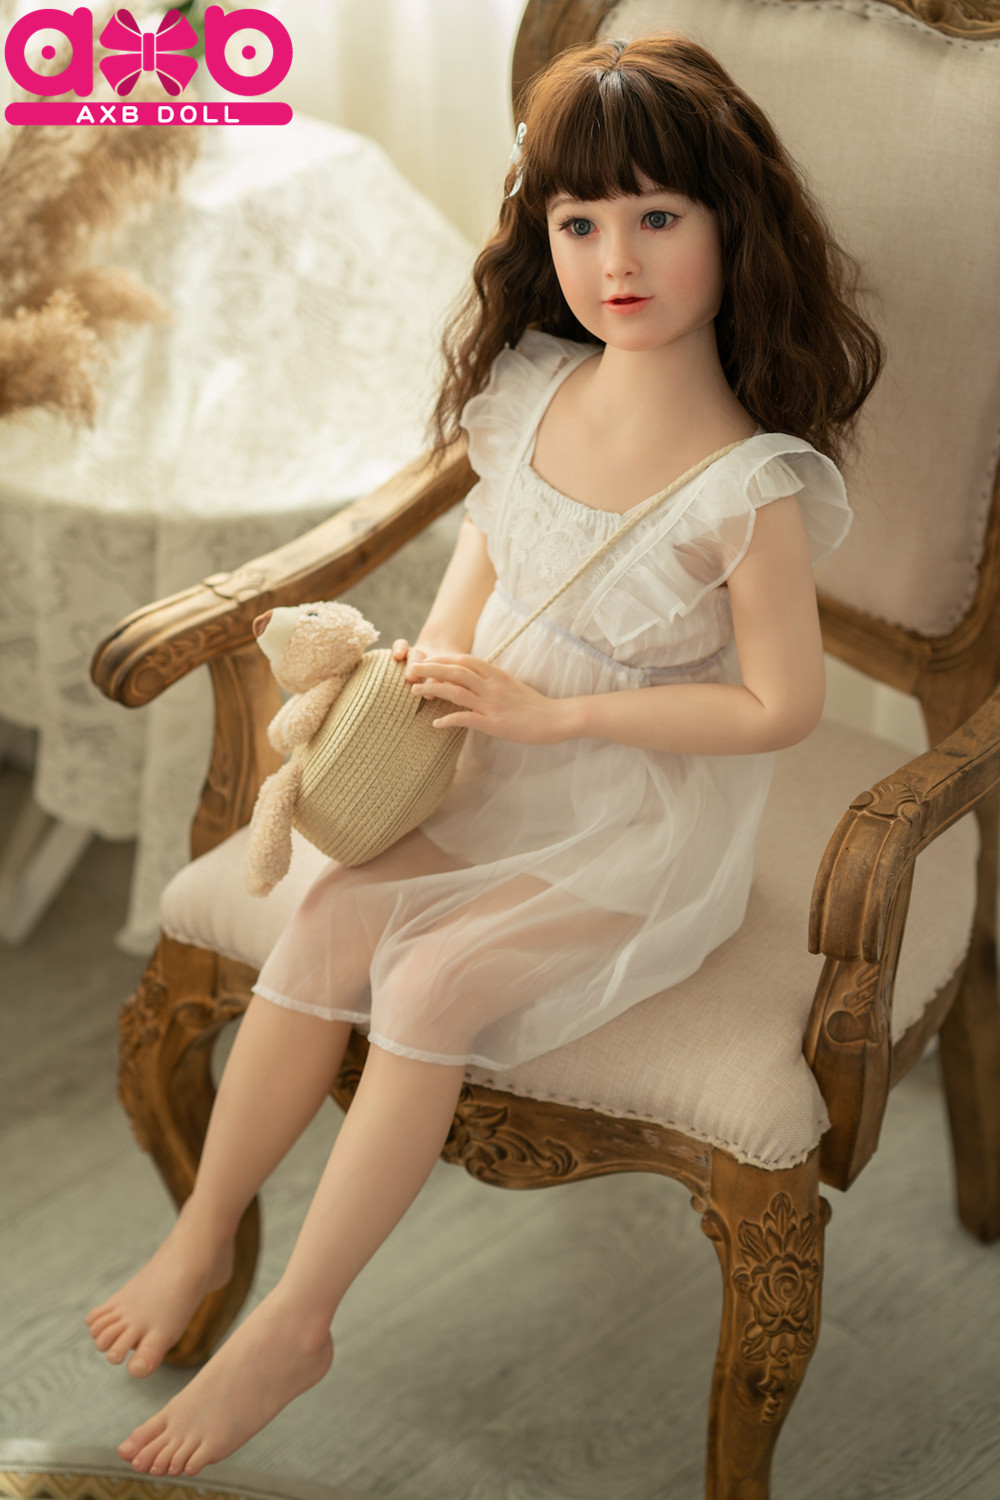 AXBDOLL 110cm GB34# Super Real Silicone Doll - Click Image to Close